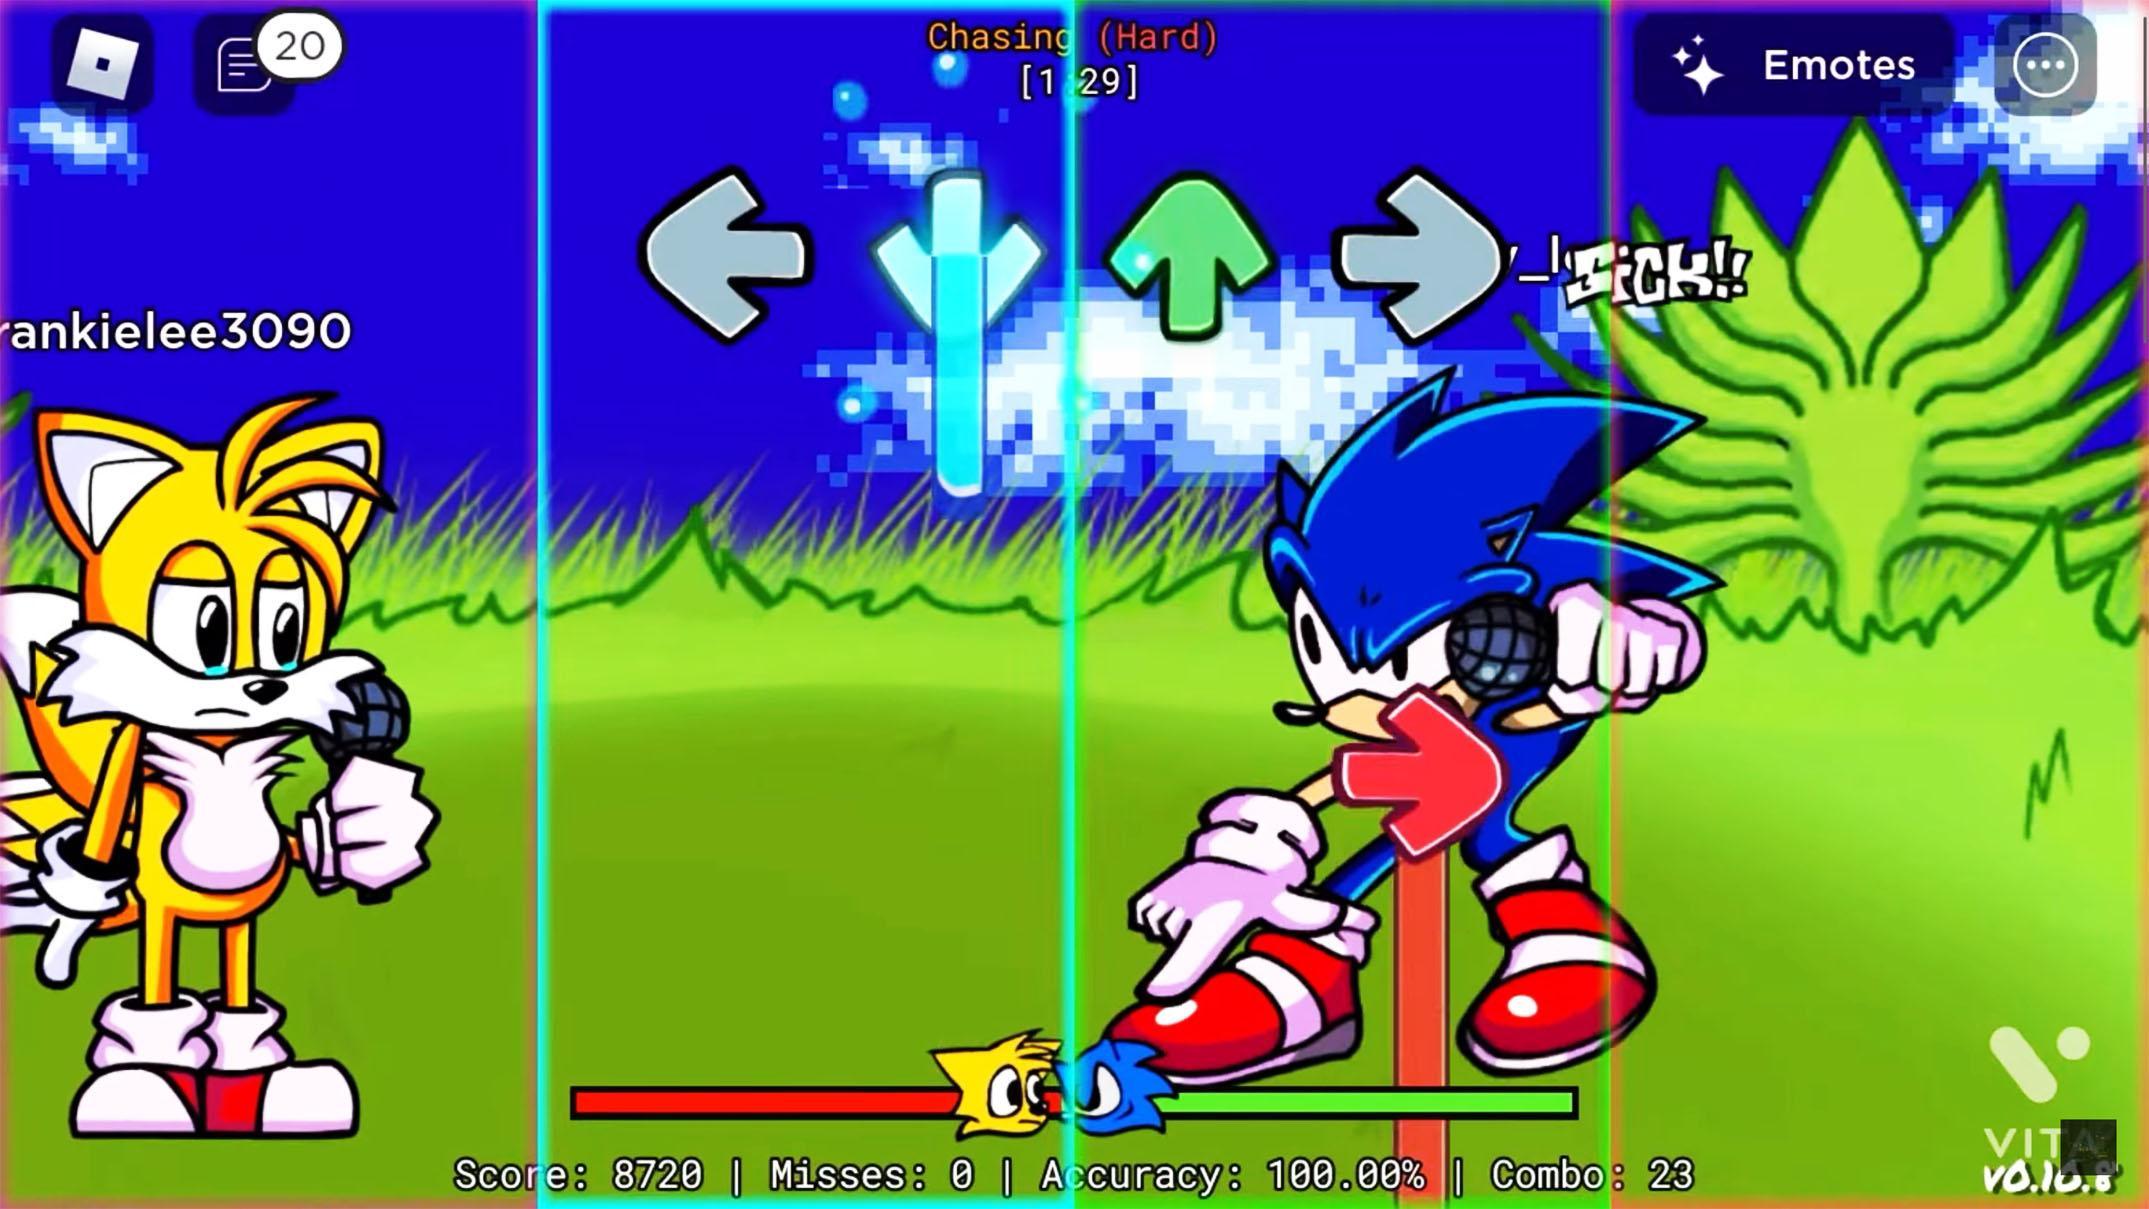 Vs Sonic.Exe Full week android - release date, videos, screenshots